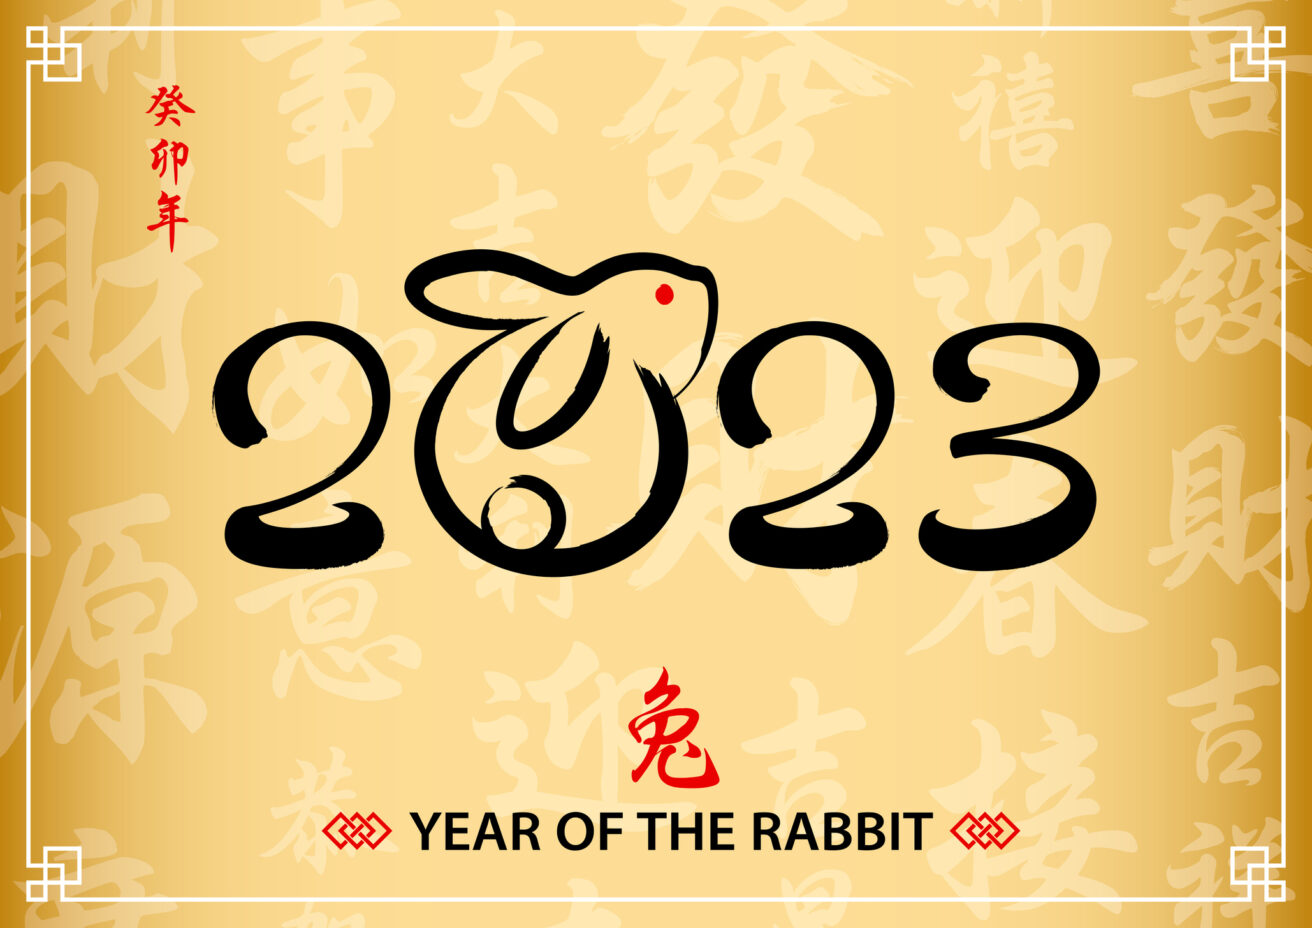 Year of the Rabbit 2023 Calligraphy